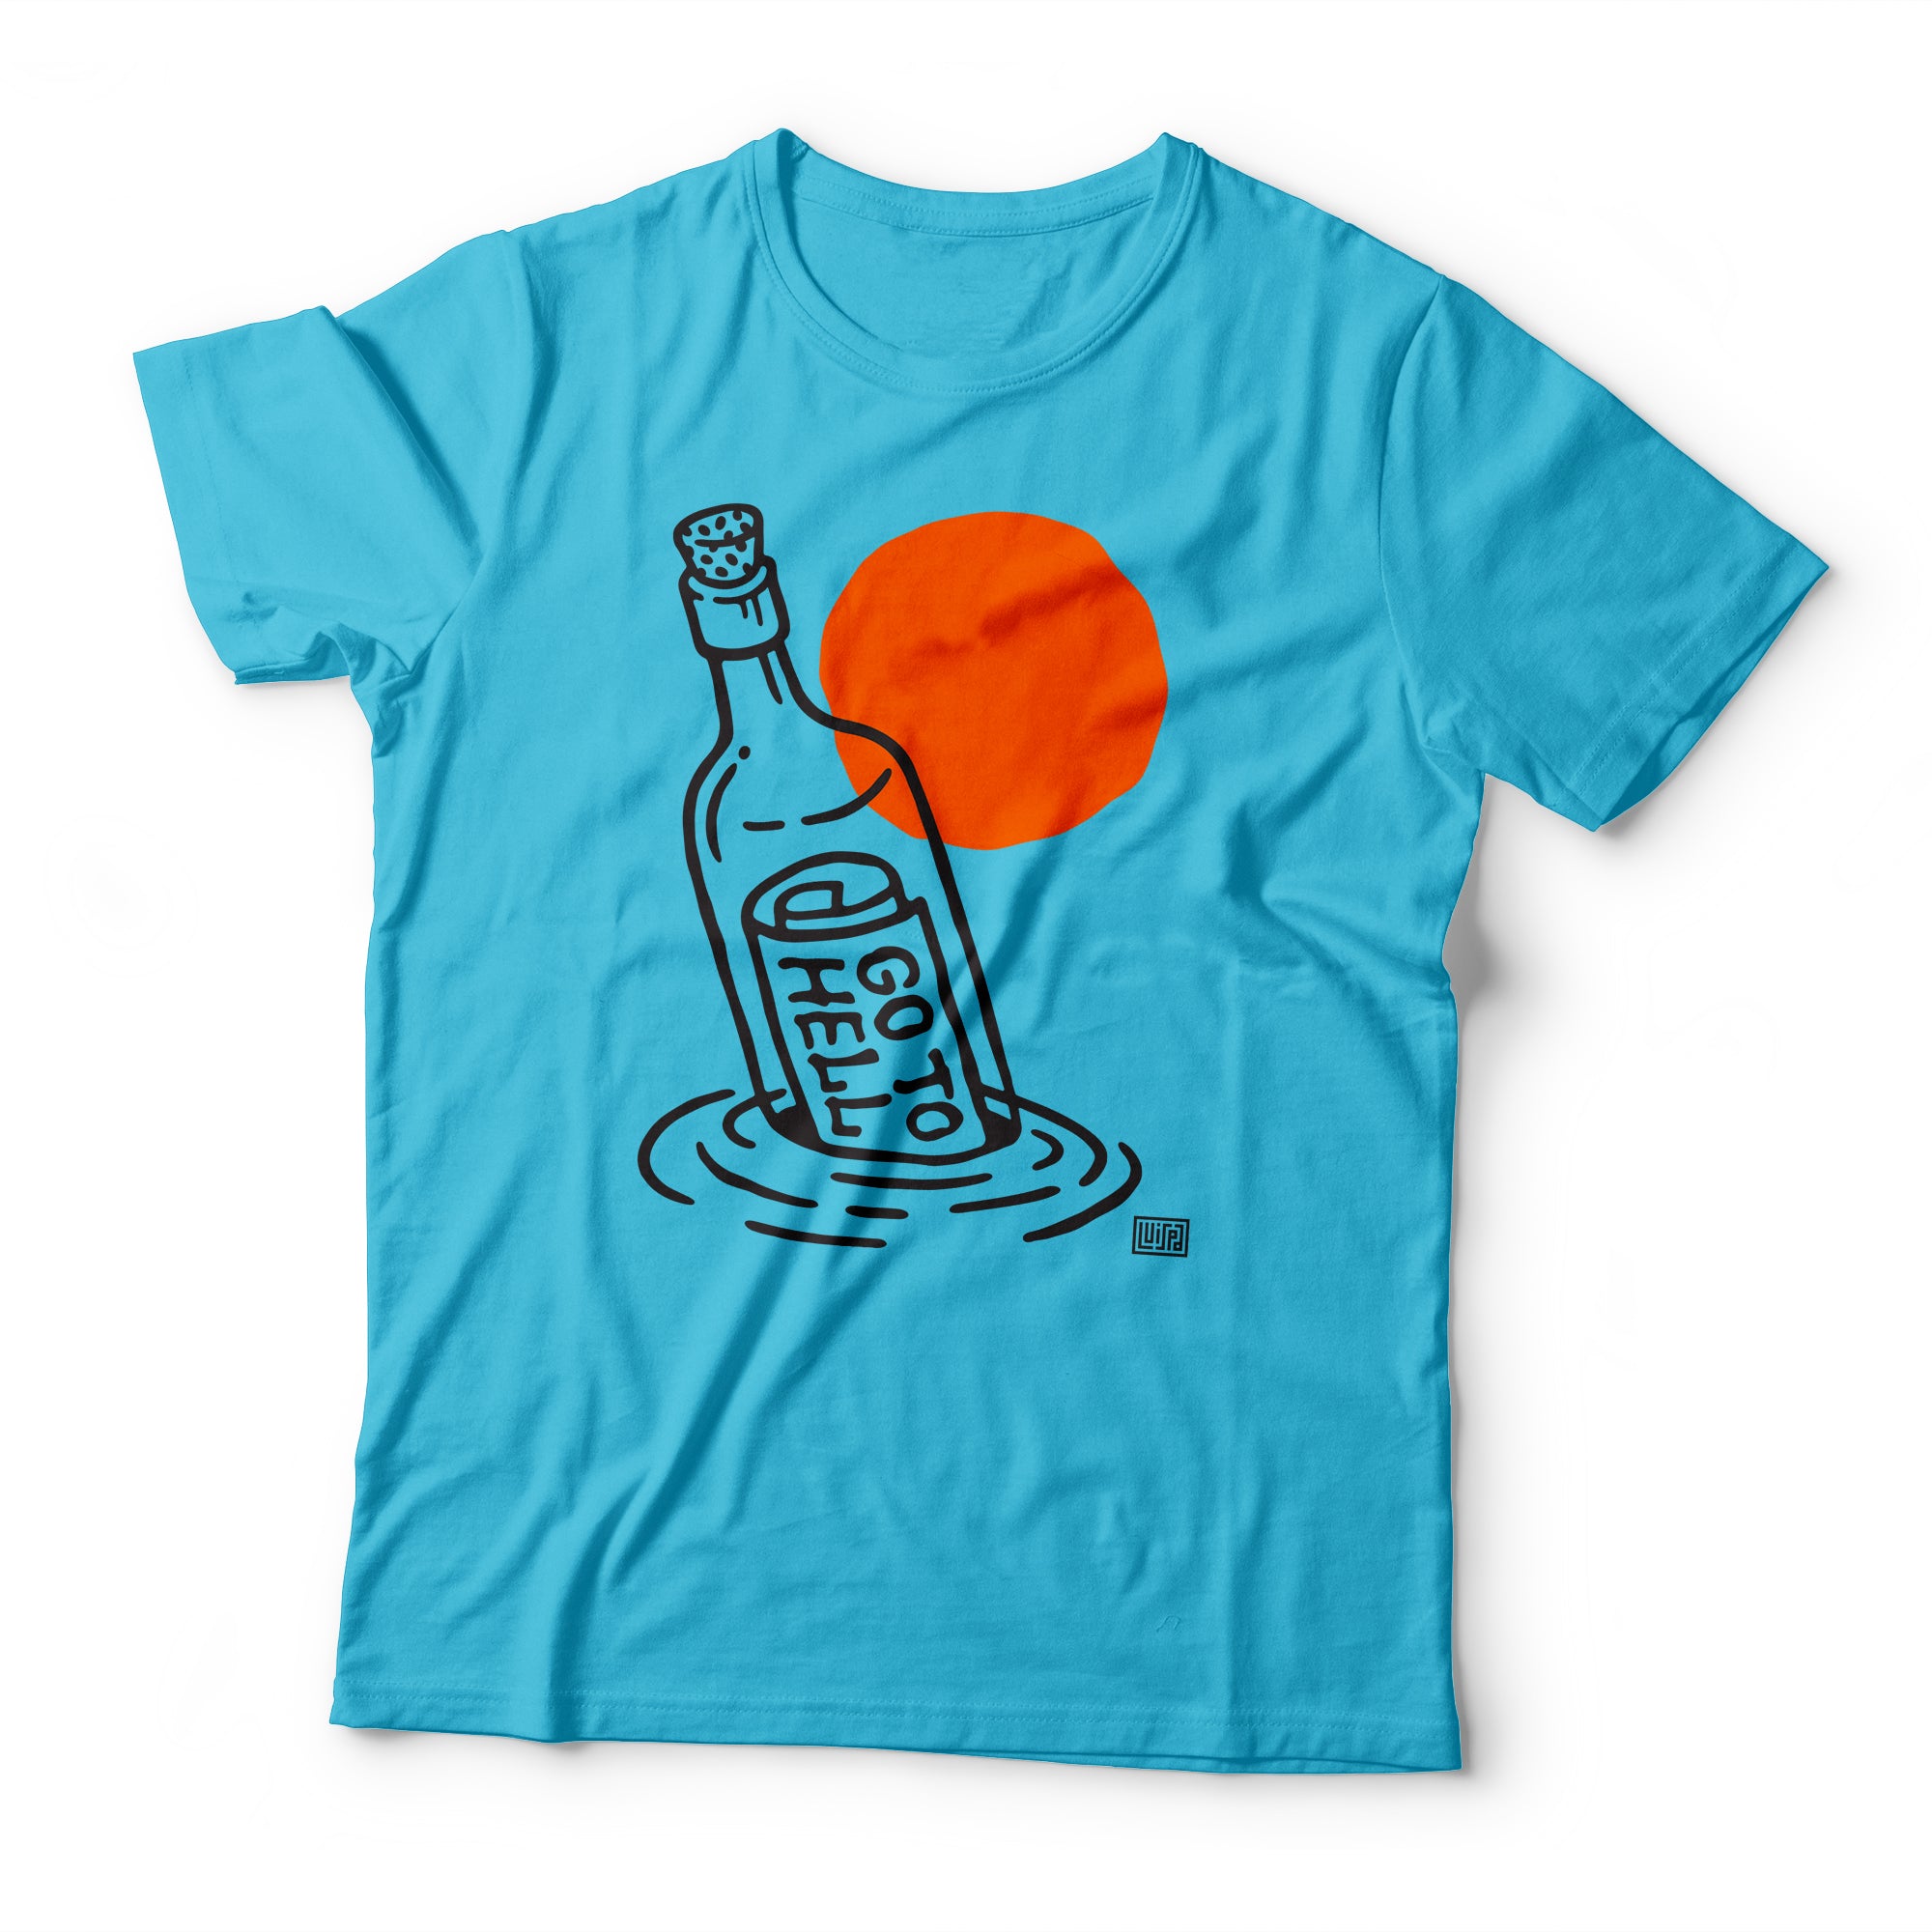 The Bottle T-Shirt by Lulab